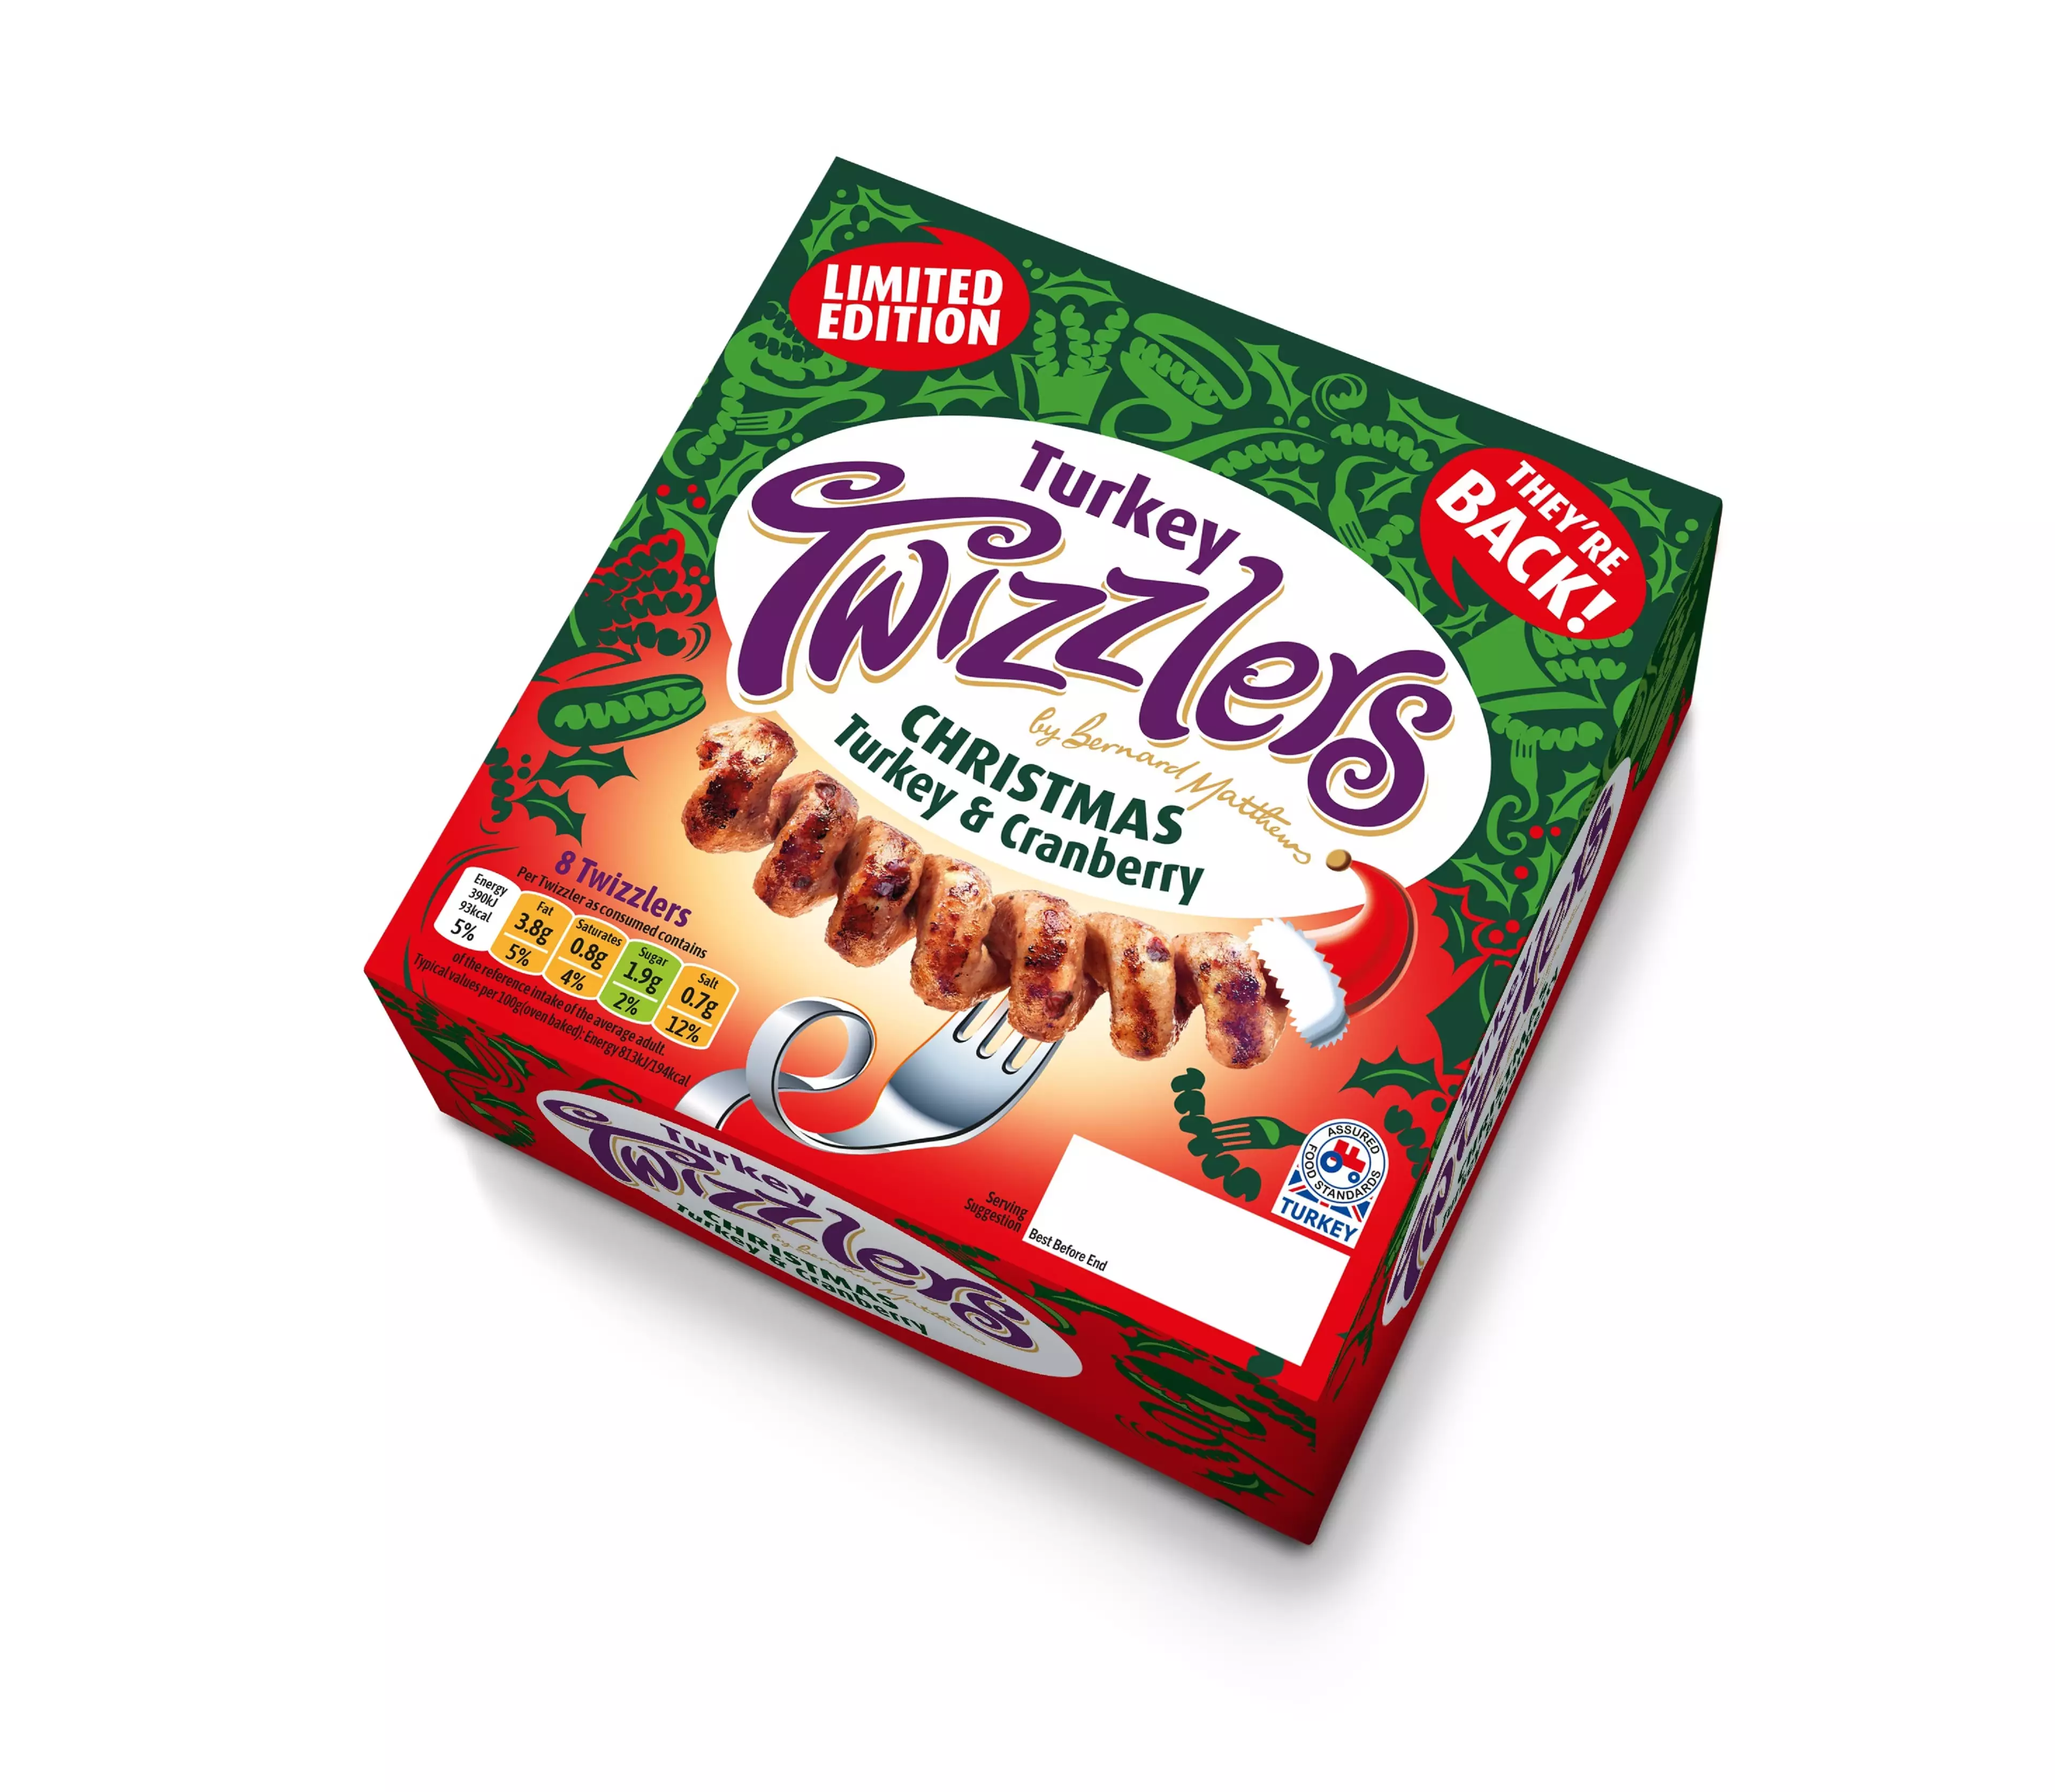 You can buy Turkey Twizzlers from Iceland for Christmas (